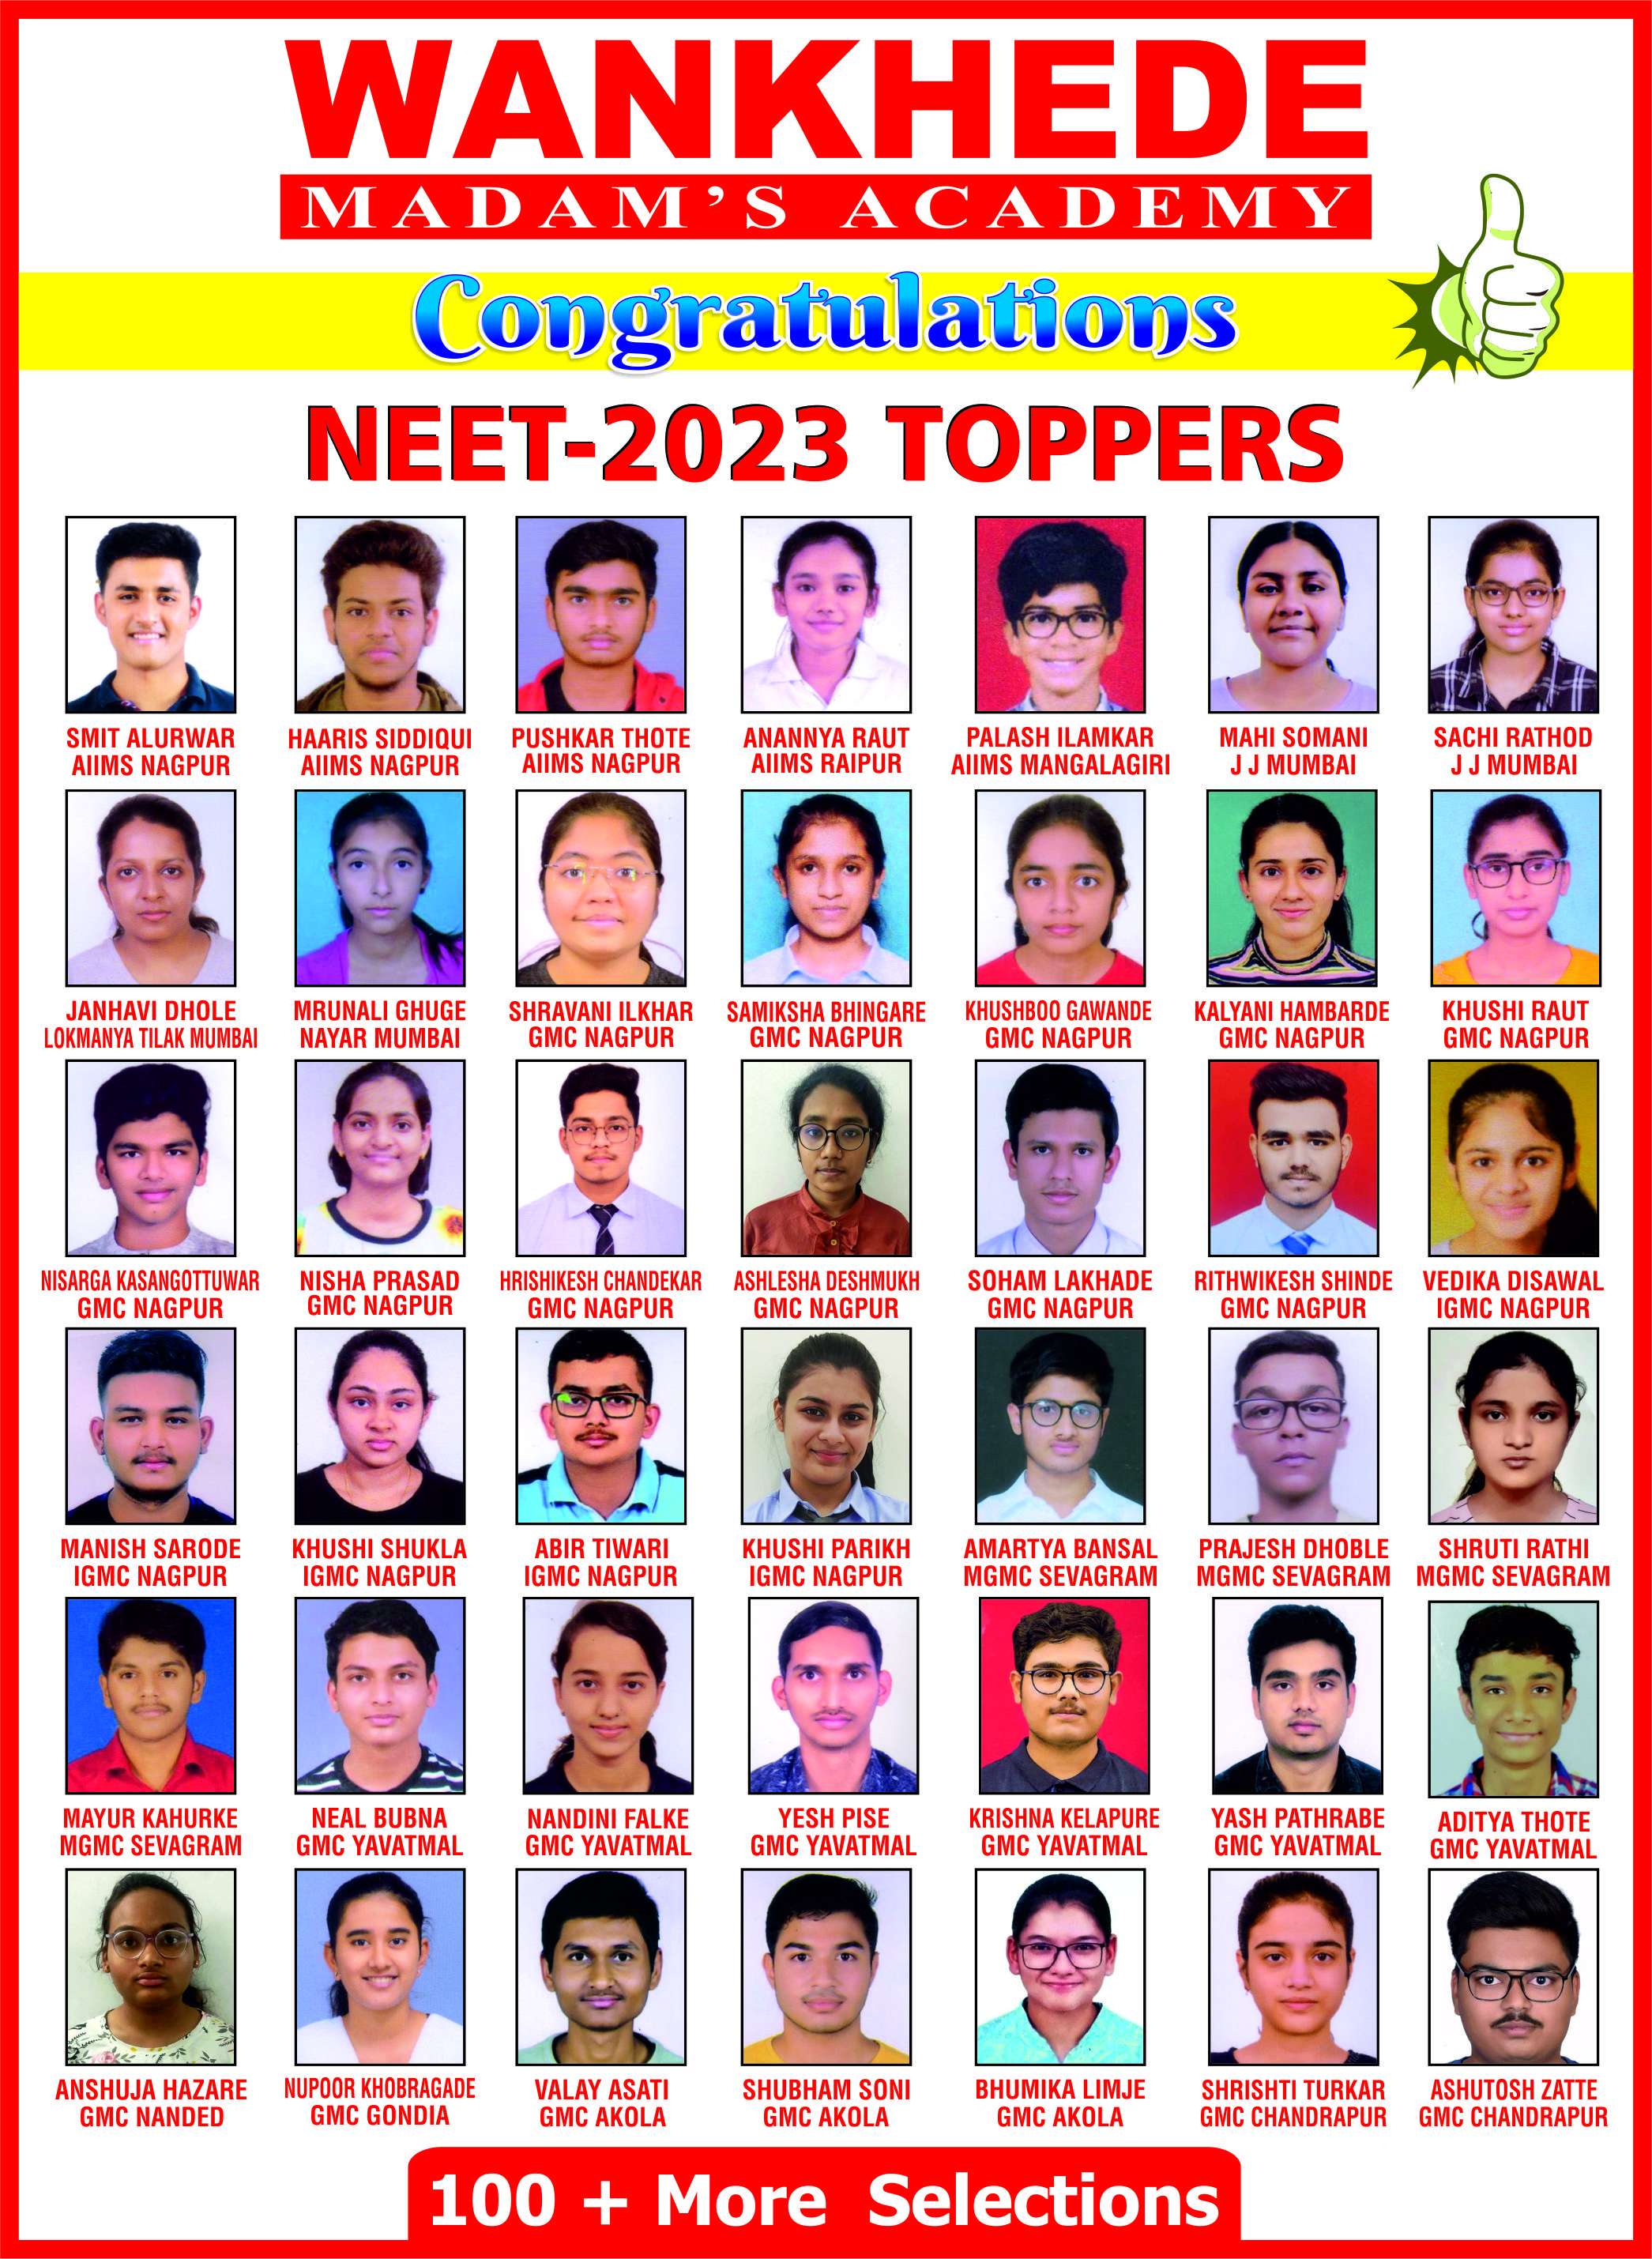 5 YEARS NEET TOPPERS